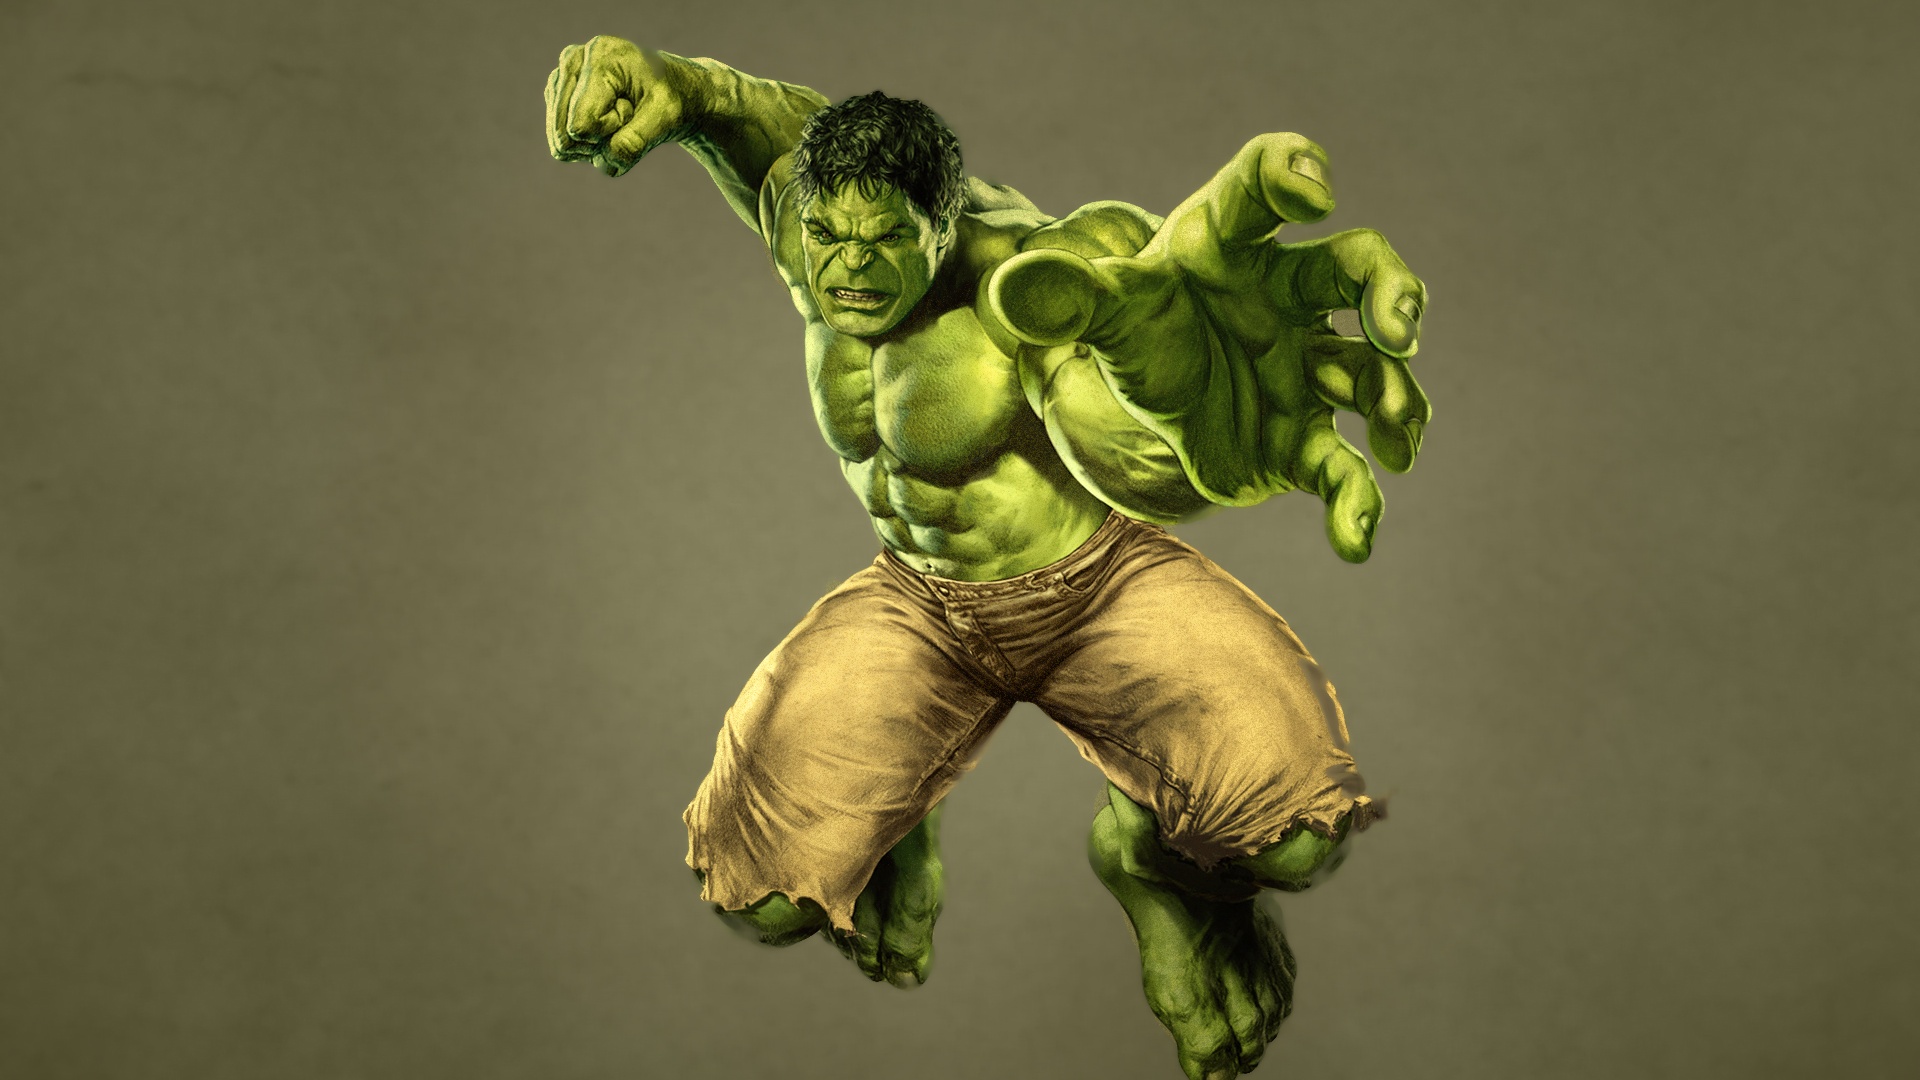 Hq Definition The Incredible Hulk Background Image For